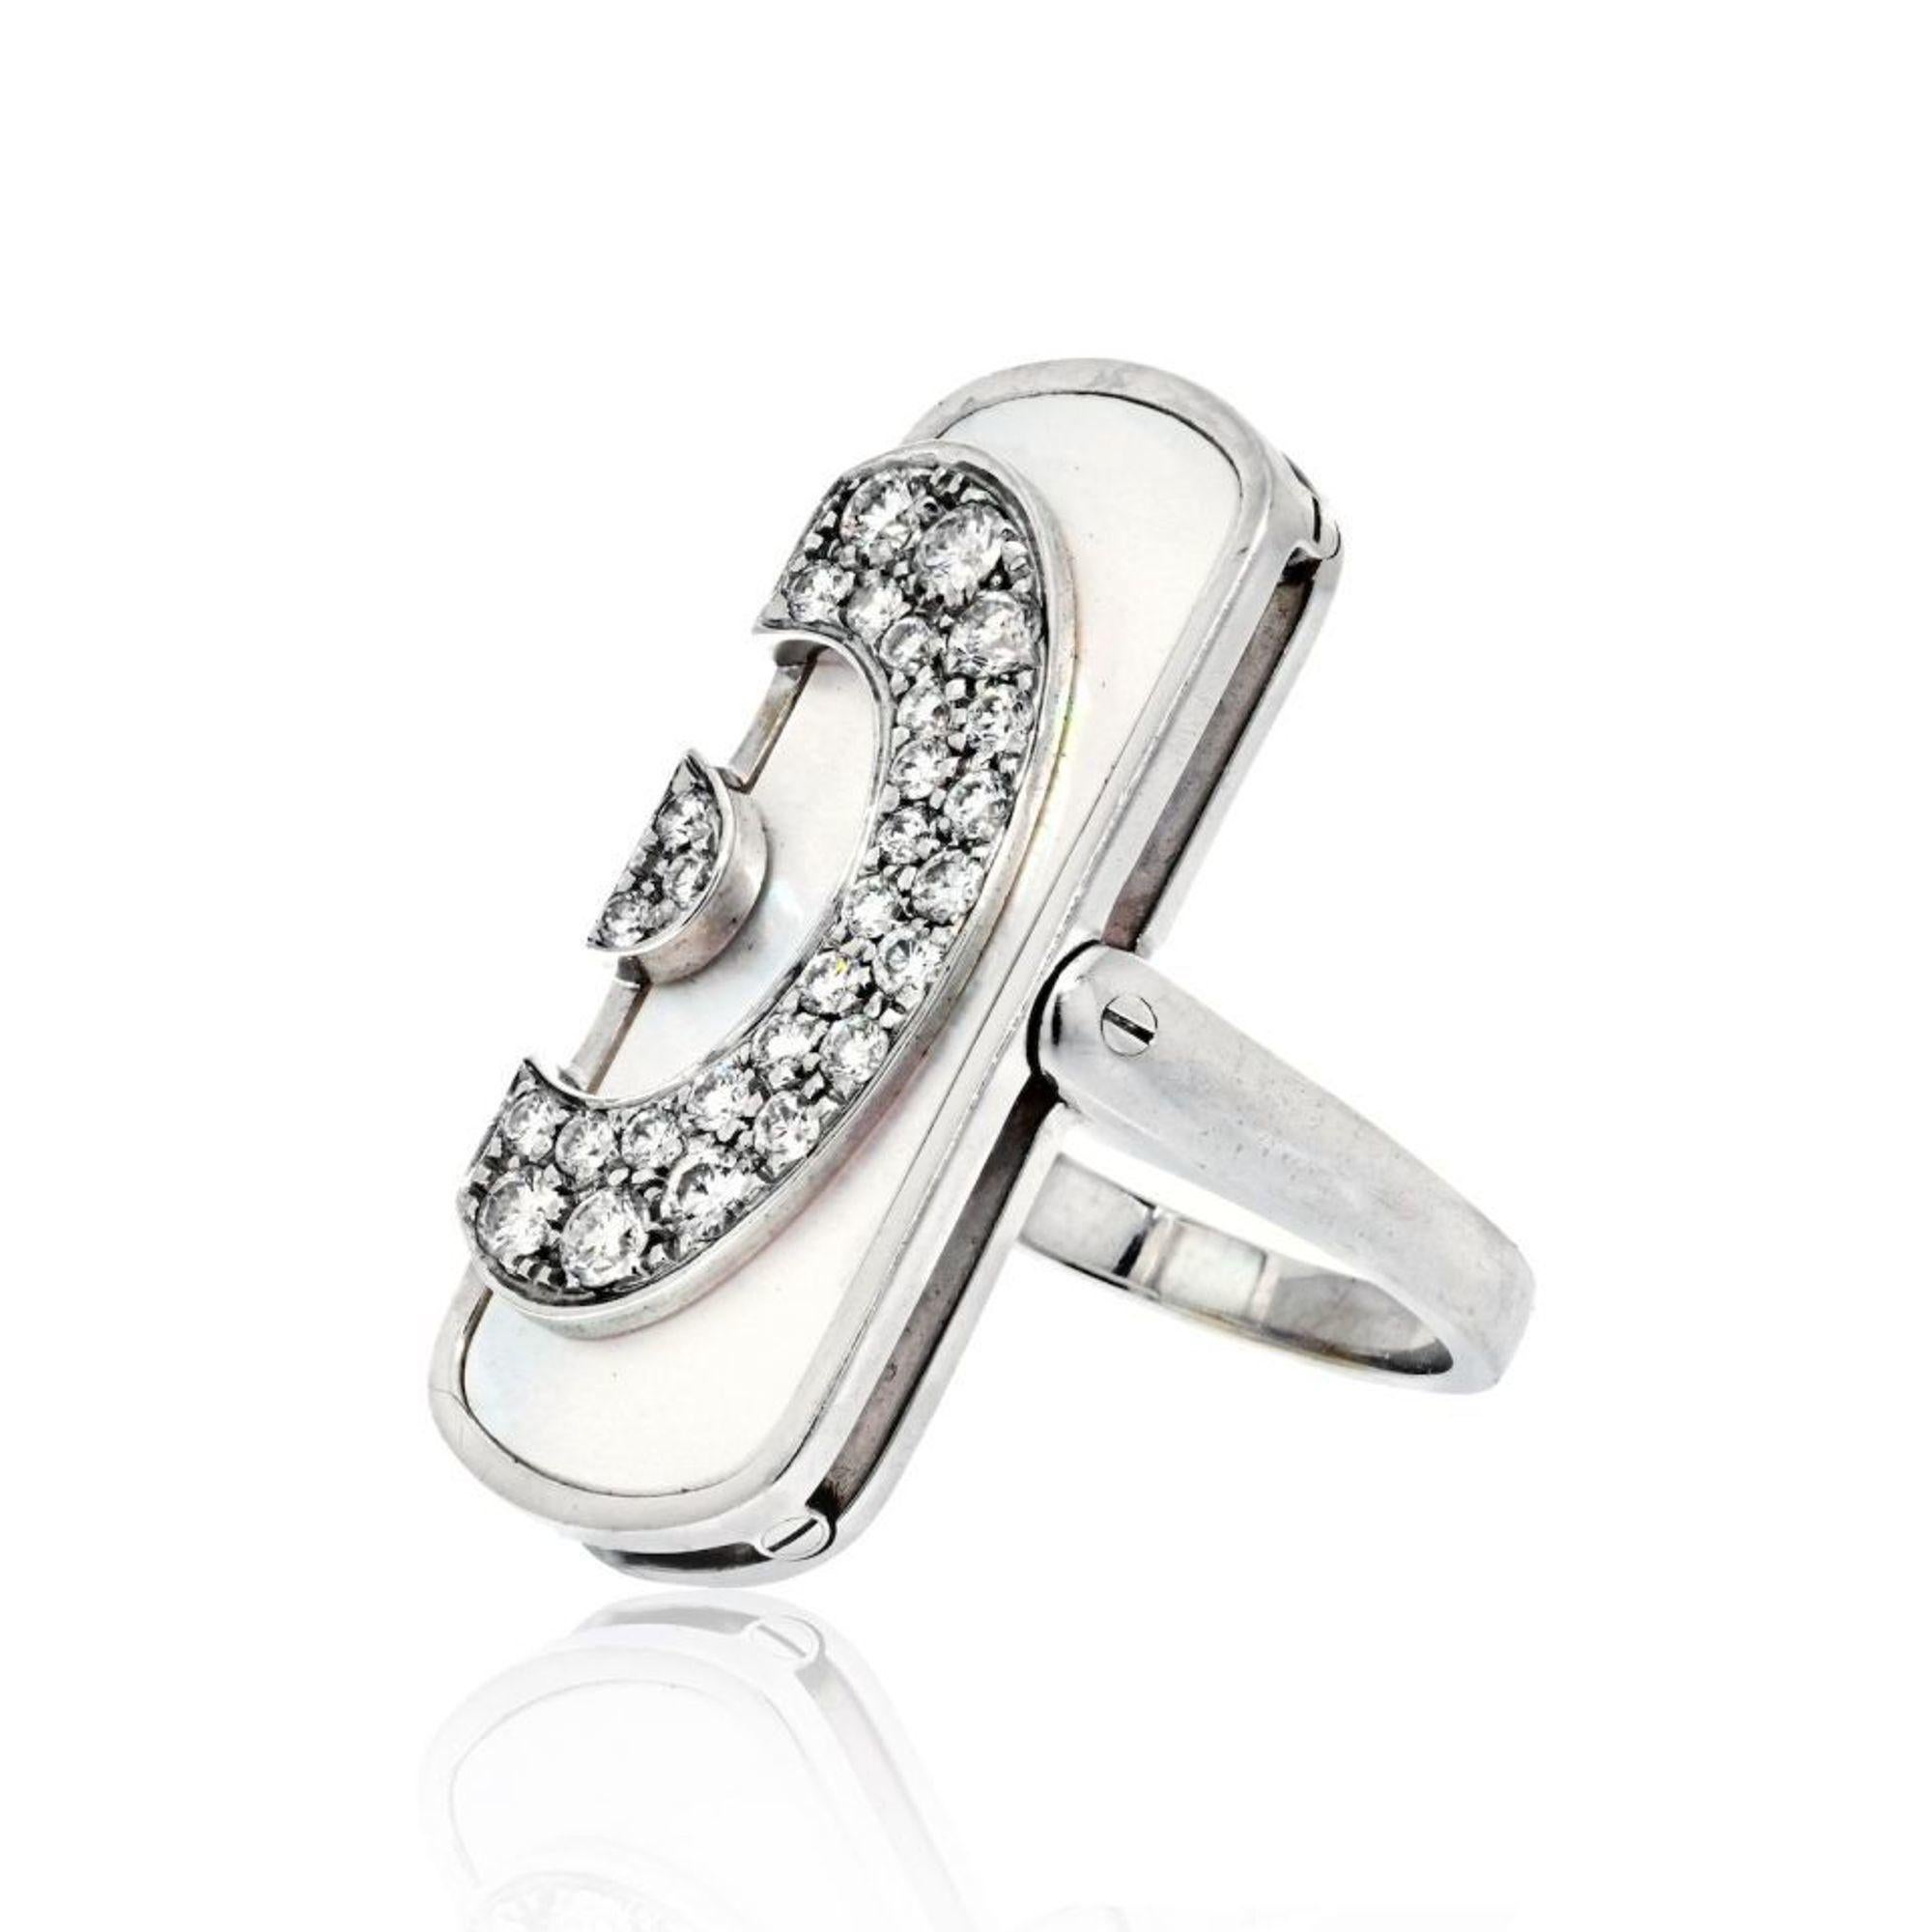 This beautiful Bvlgari ring showcases pave set round brilliant cut diamonds mounted over grey mother of pearl making it a perfect gift for a mother, anniversary, holiday or just a party. Crafted in 18k white gold. This exciting and unique design